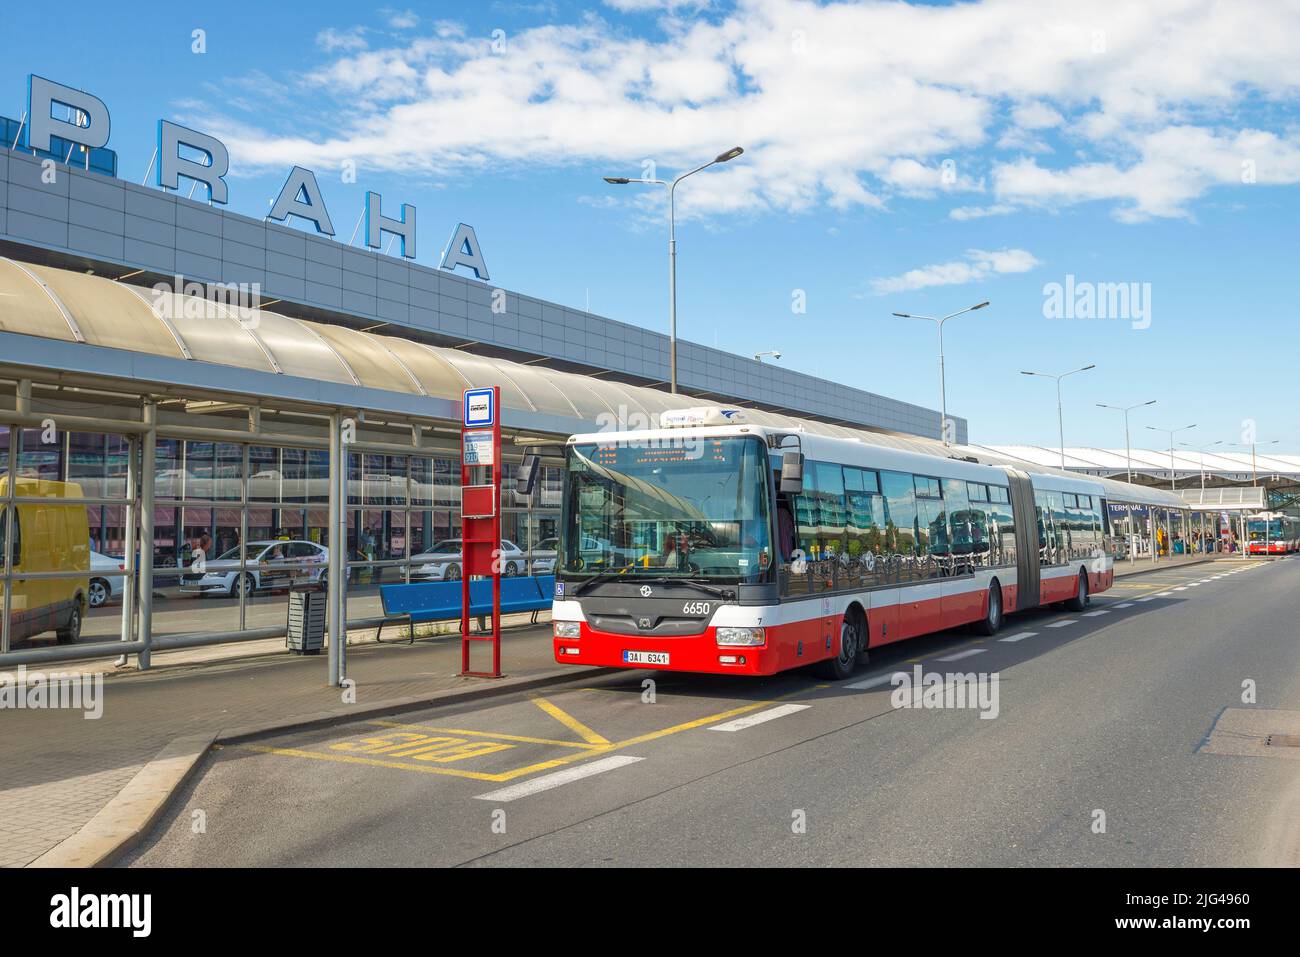 PRAGUE, CZECH REPUBLIC - APRIL 30, 2018: City shuttle bus at a stop at the airport on a sunny May day Stock Photo